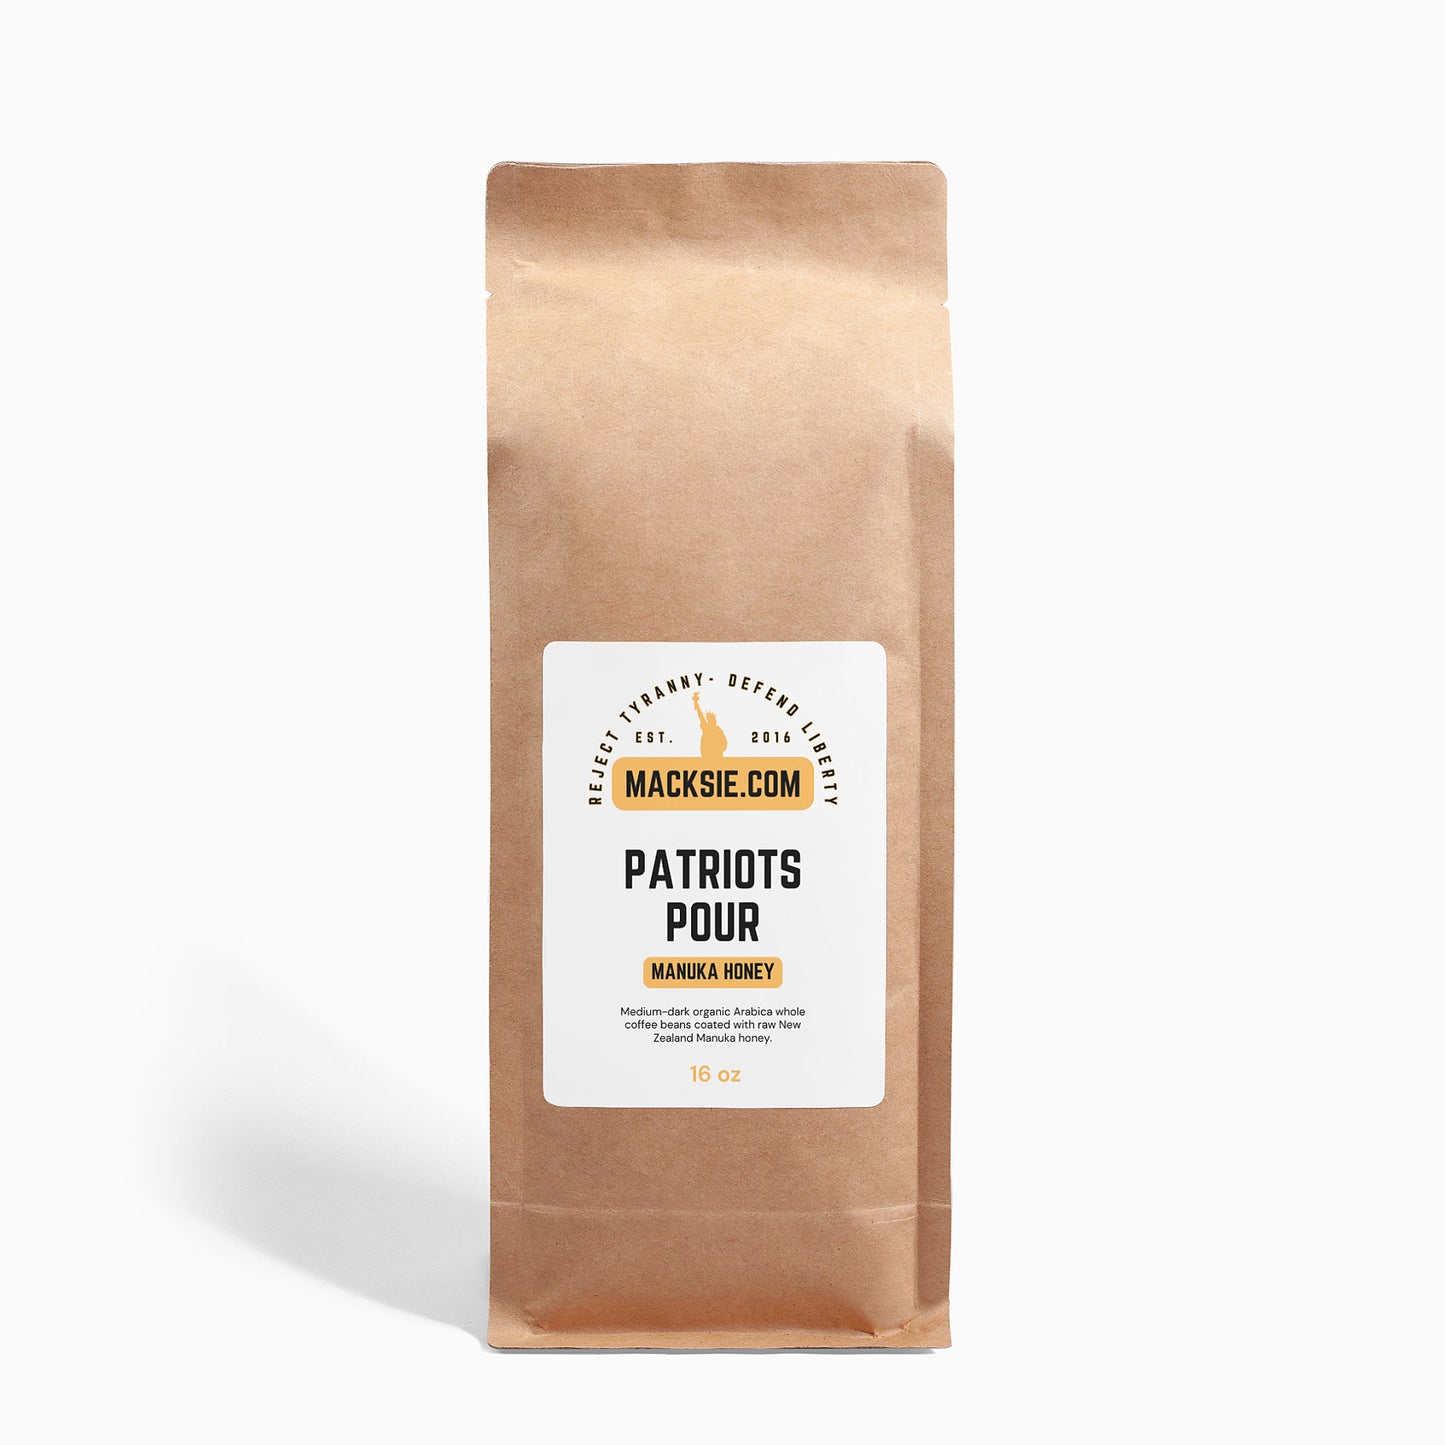 Patriots Pour Manuka Honey Coffee - The Taste of Freedom in Every Cup